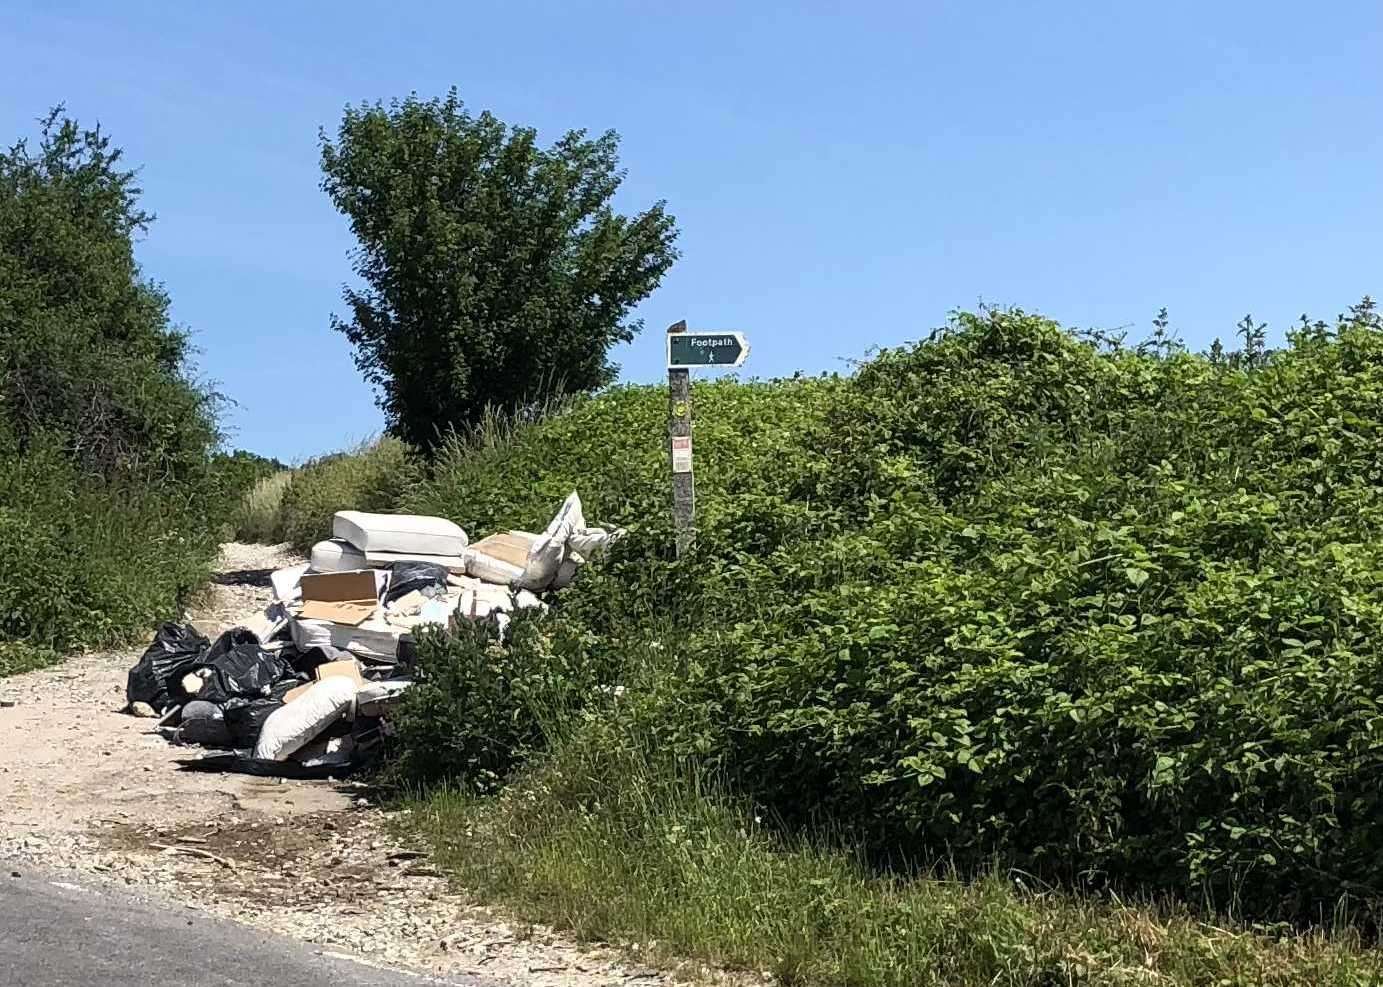 In June 2021 Gravesham Borough Council received a report of a large fly tip in Cobhambury Road, Cobham